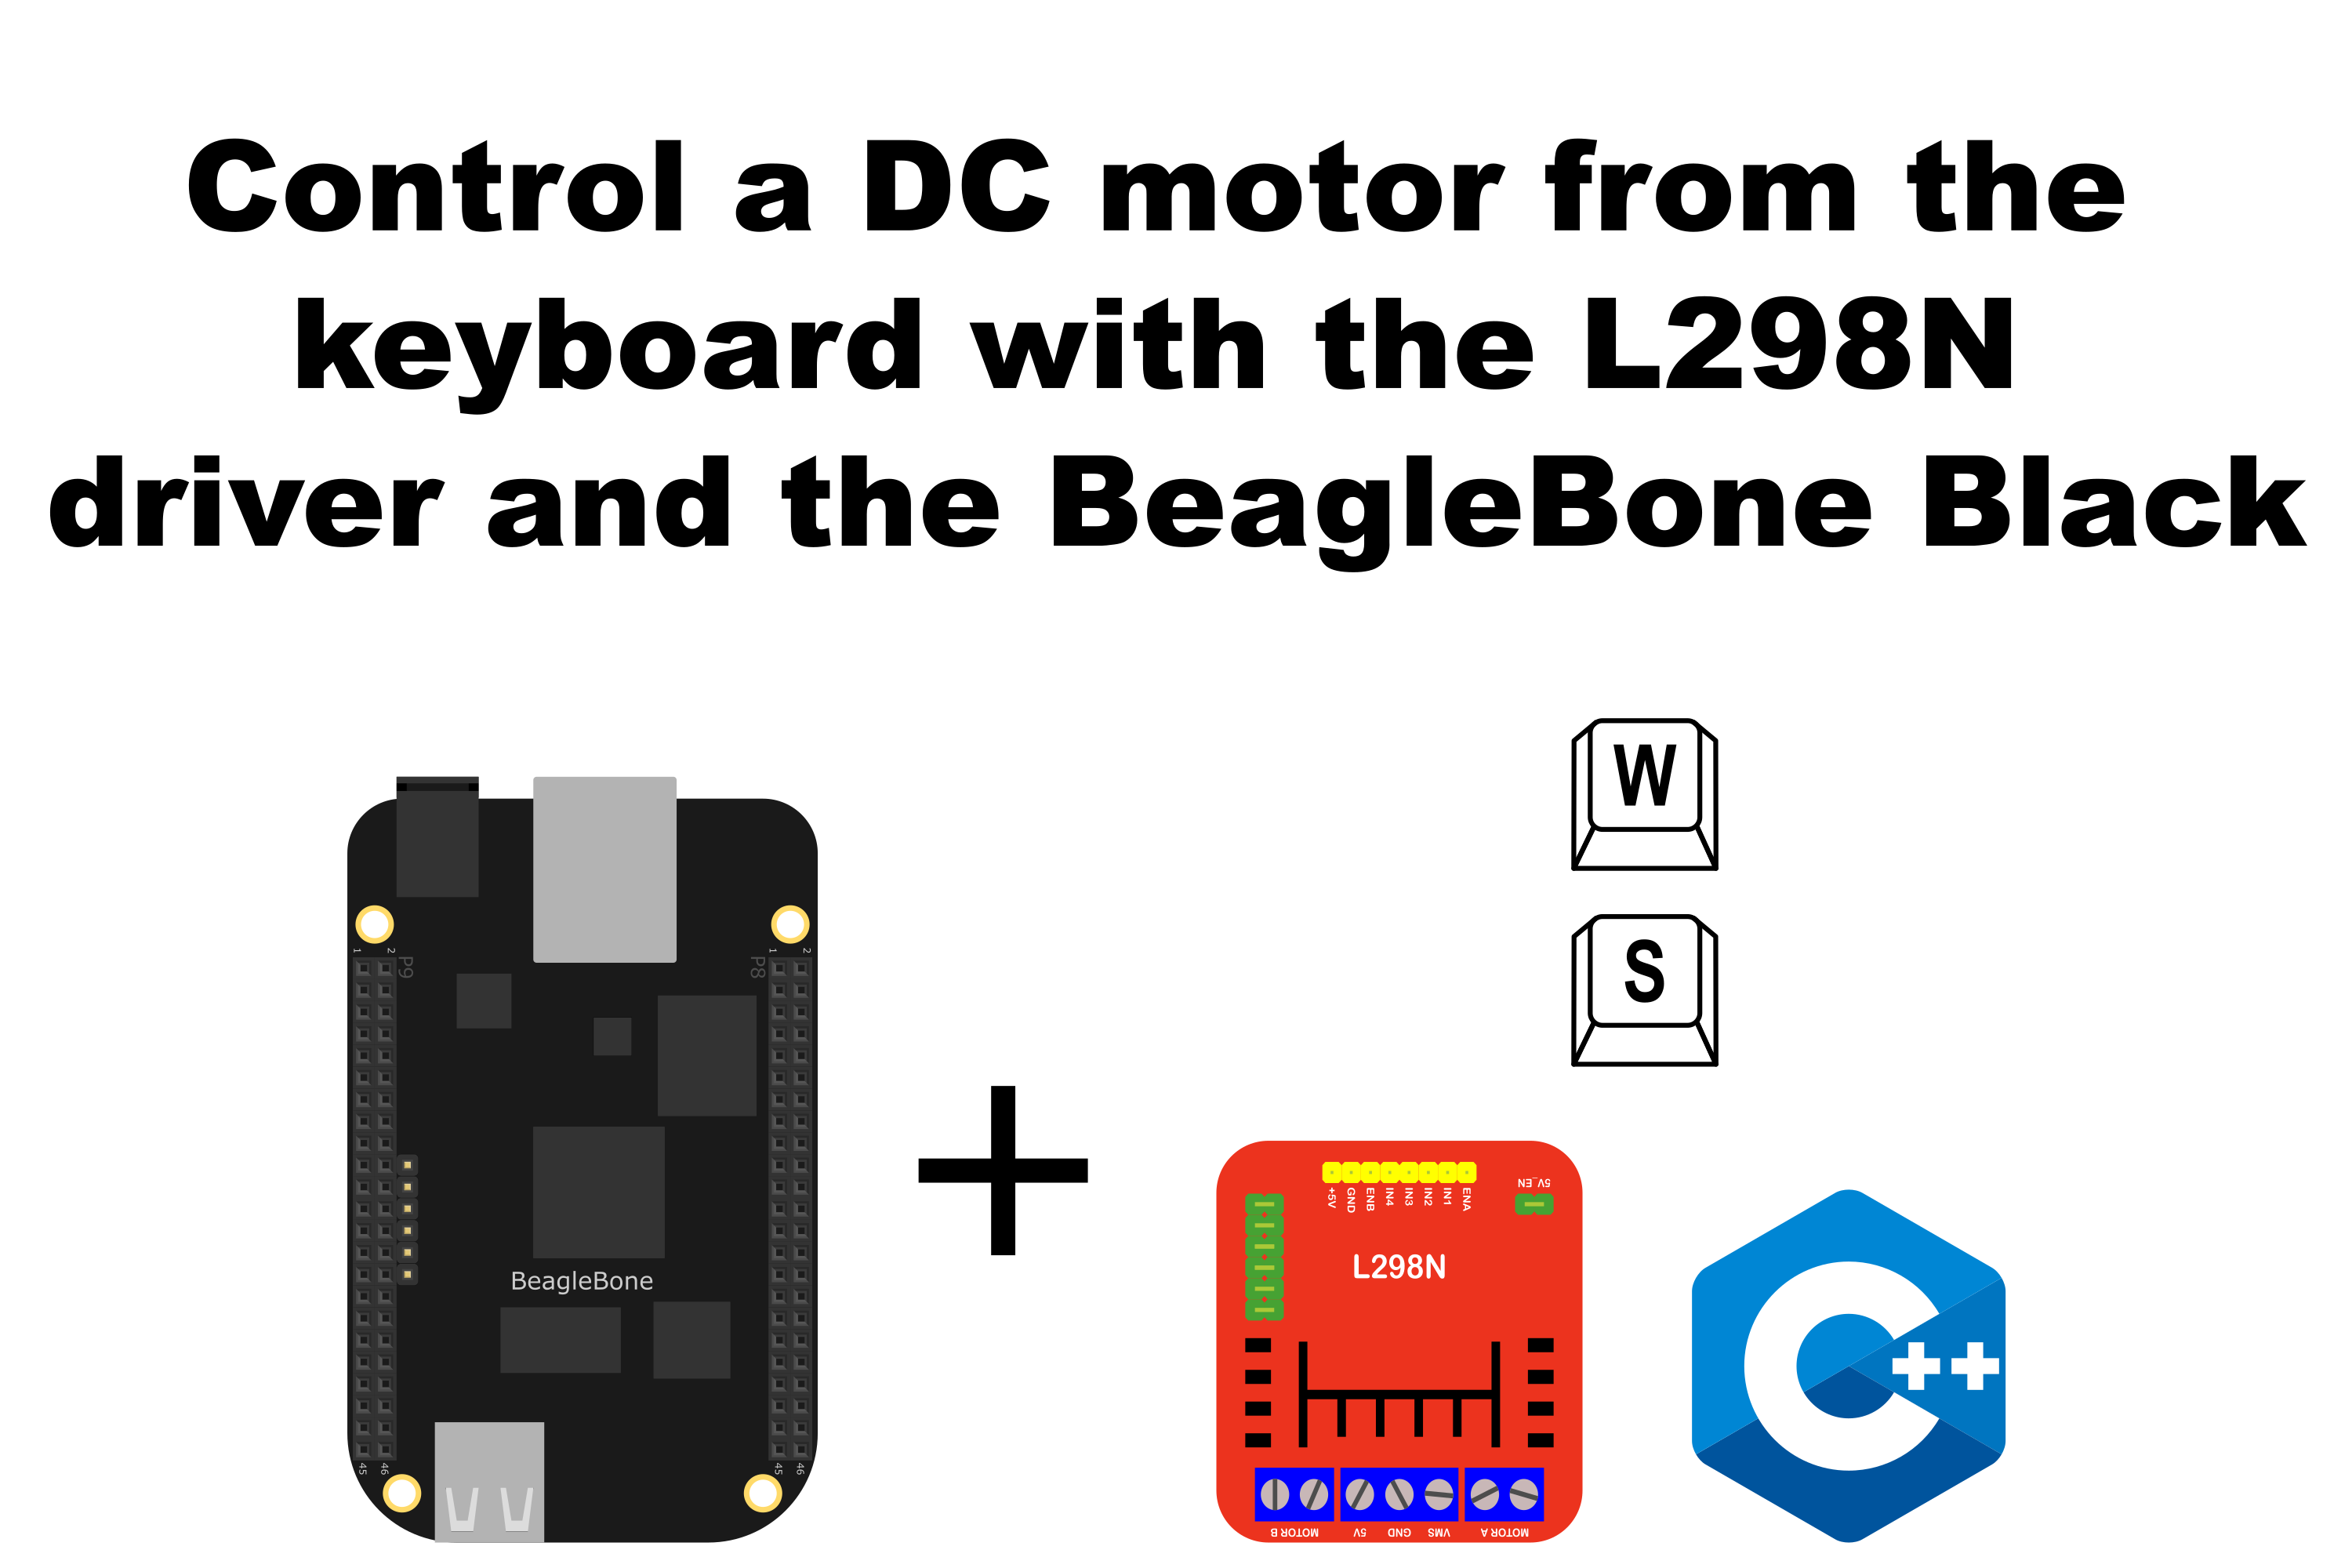 Control a DC motor from the keyboard with the L298N driver and the BeagleBone Black